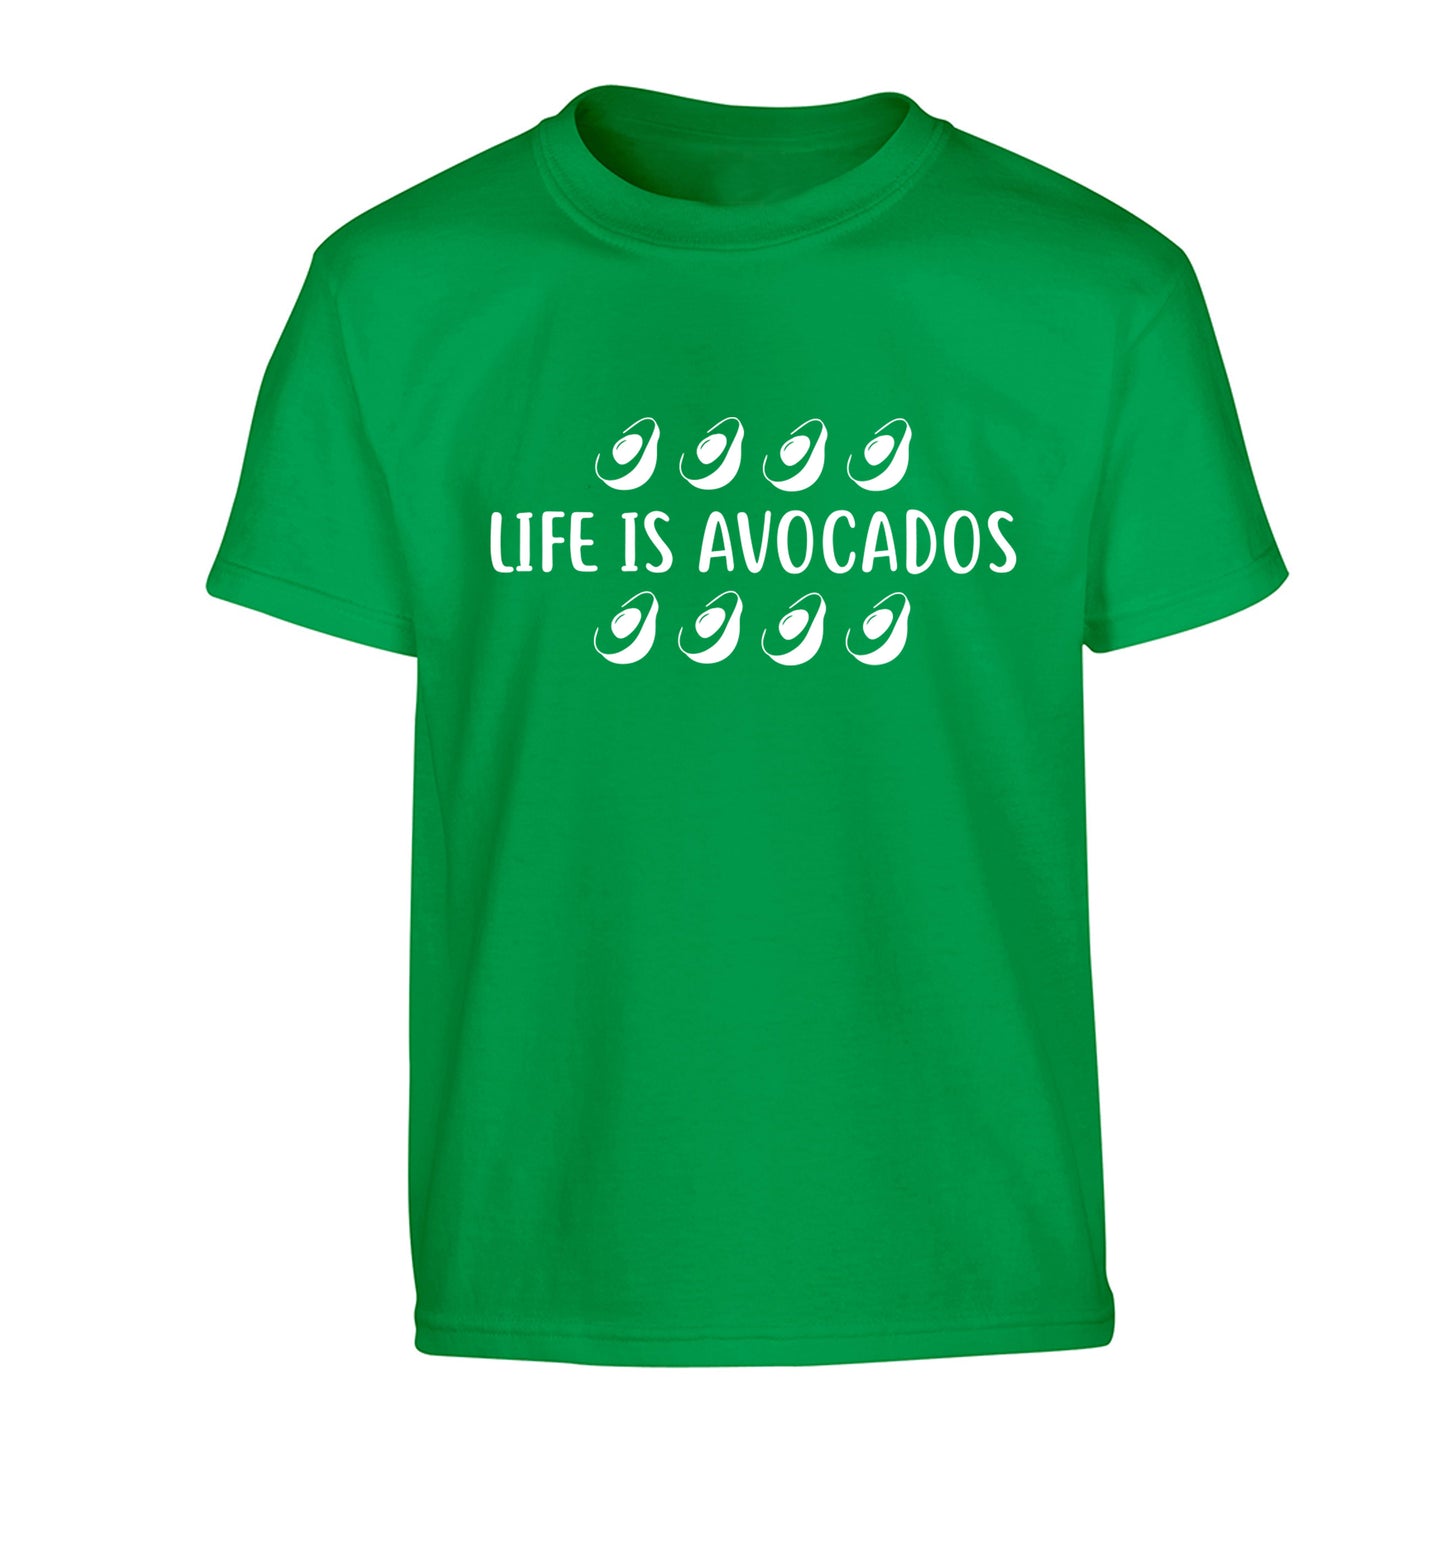 Life is avocados Children's green Tshirt 12-14 Years